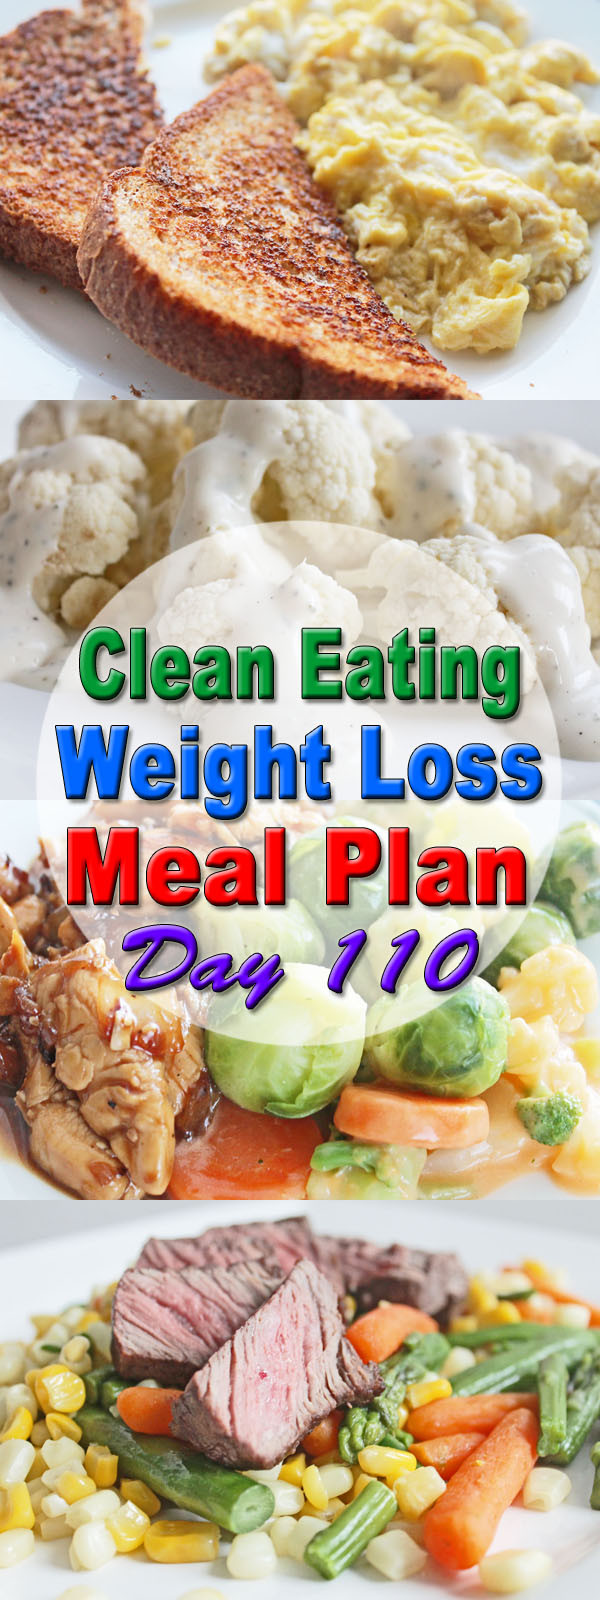 Clean Eating Weight Loss Plan
 Clean Eating Weight Loss Meal Plan 110